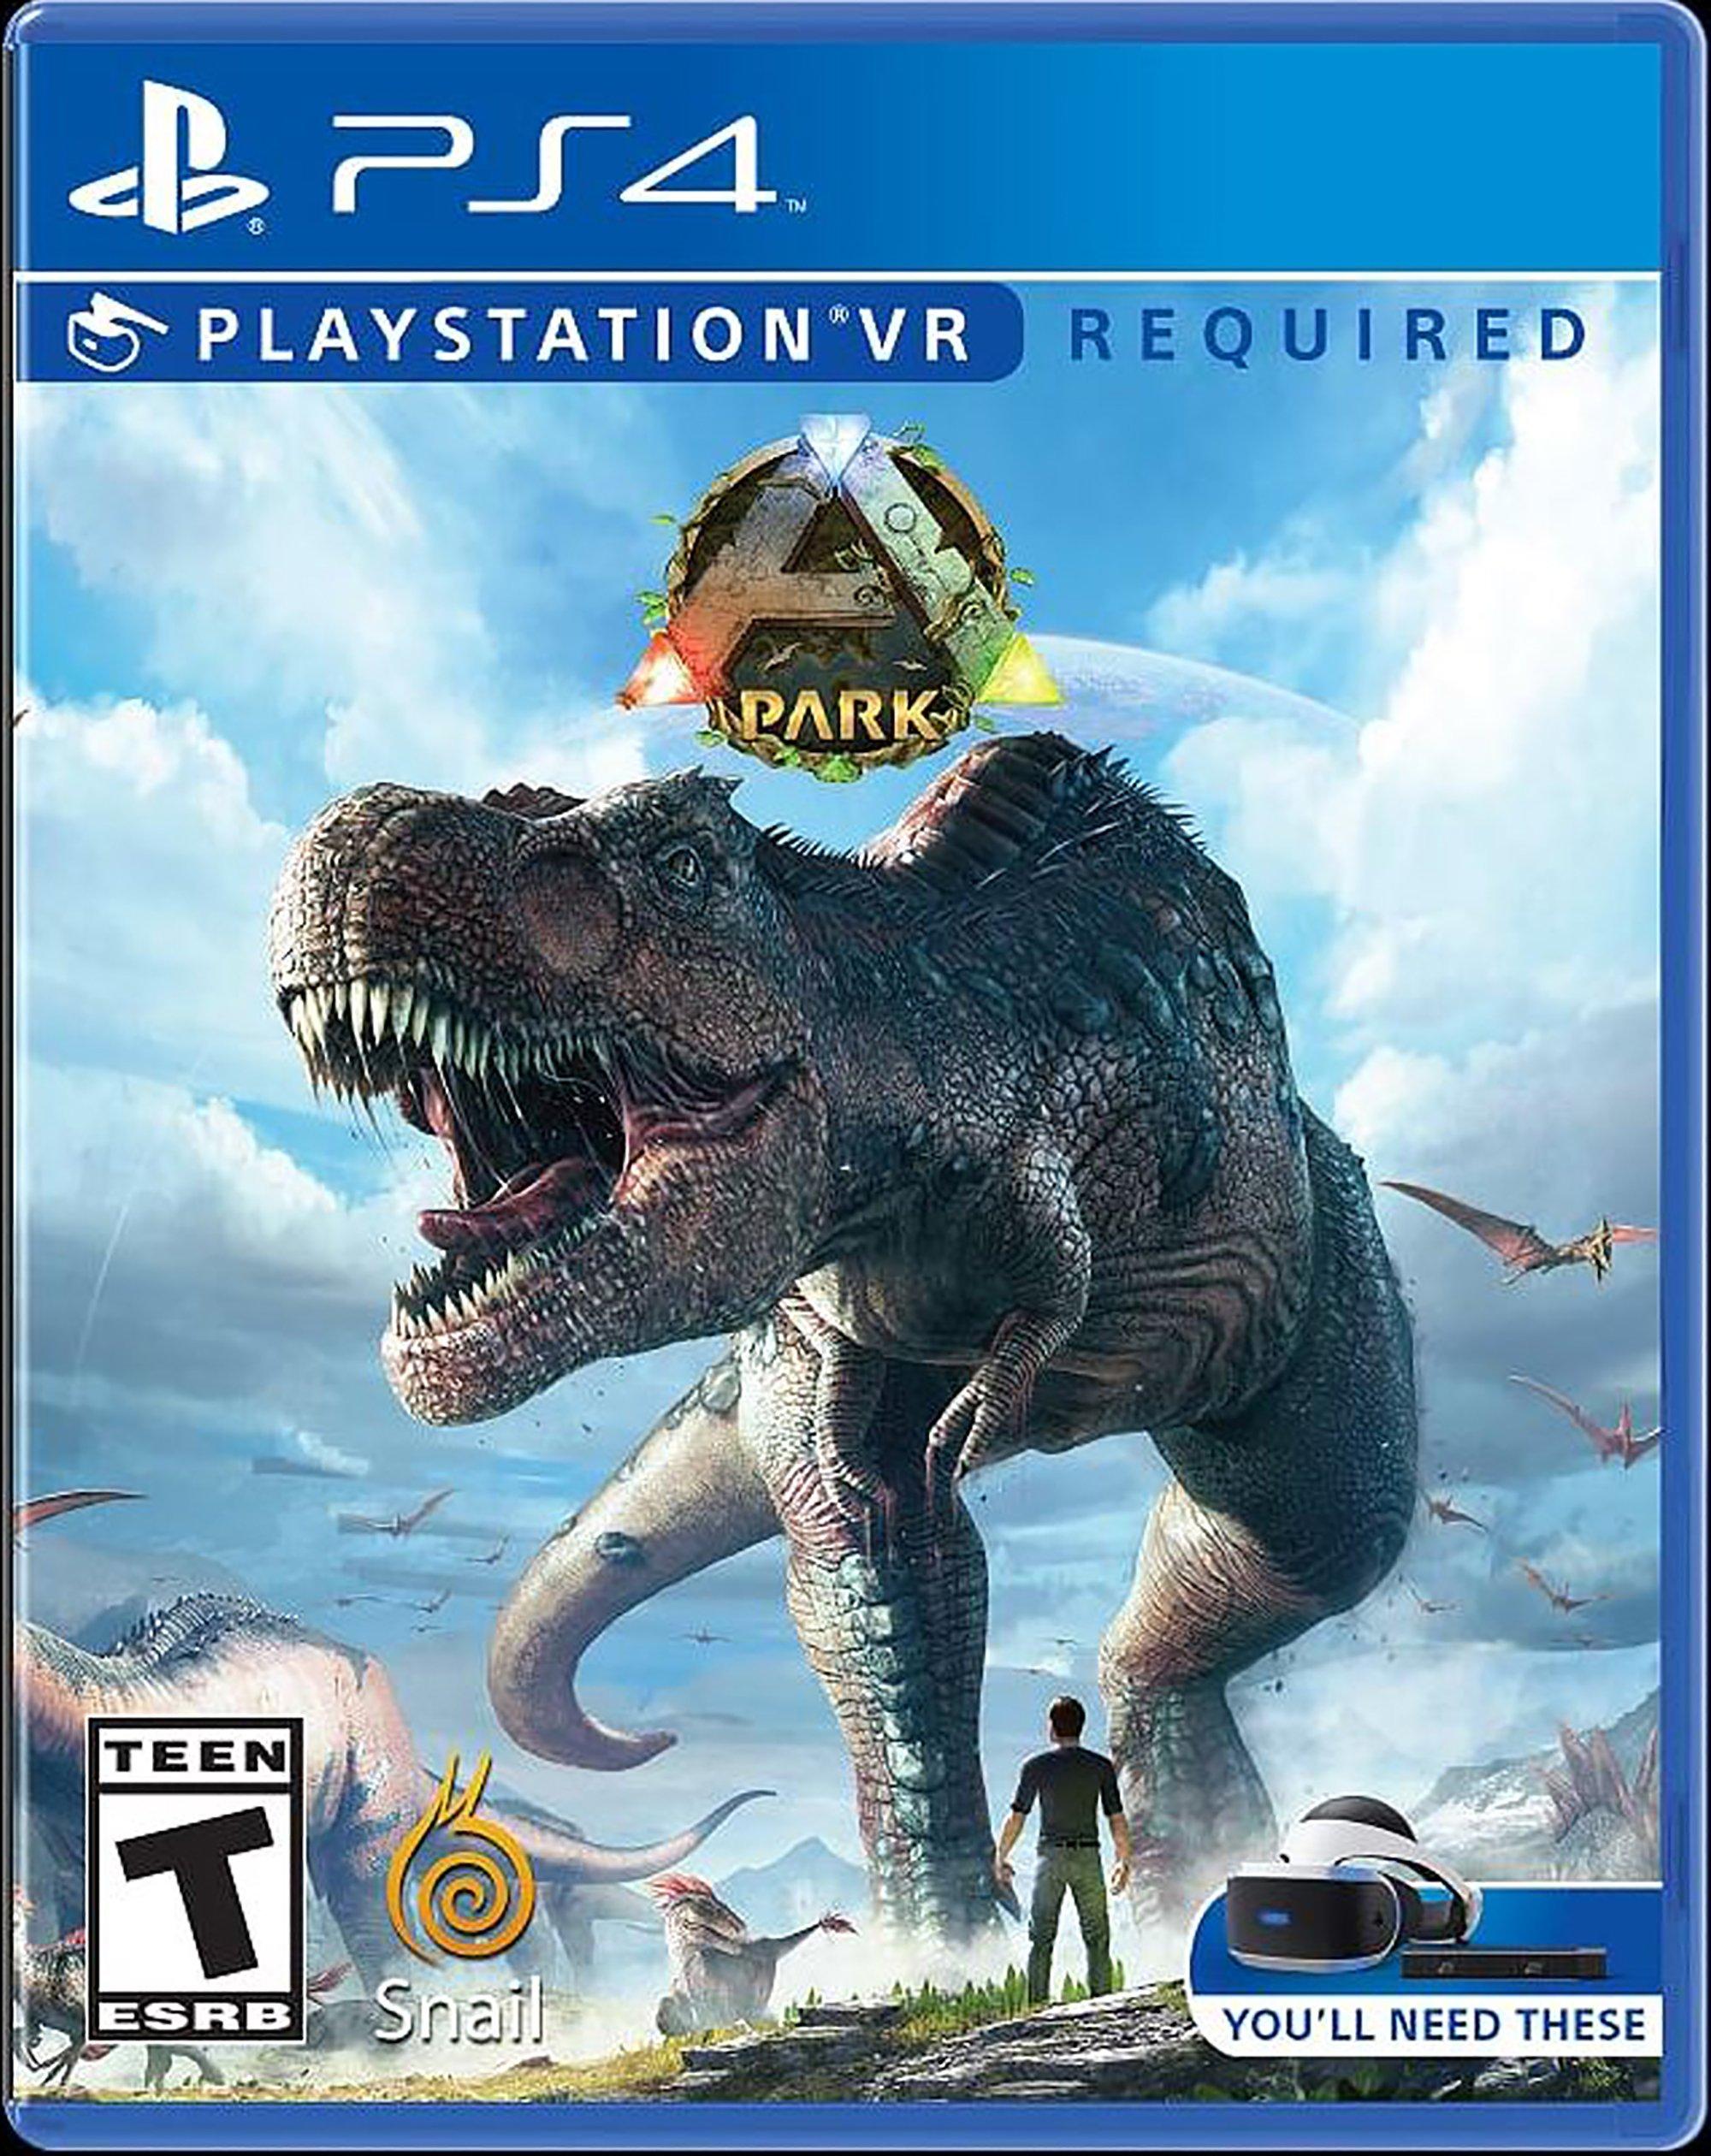 Dreams PS4 - T-Rex Dinosaur Chrome Game in 3D - PlayStation 4